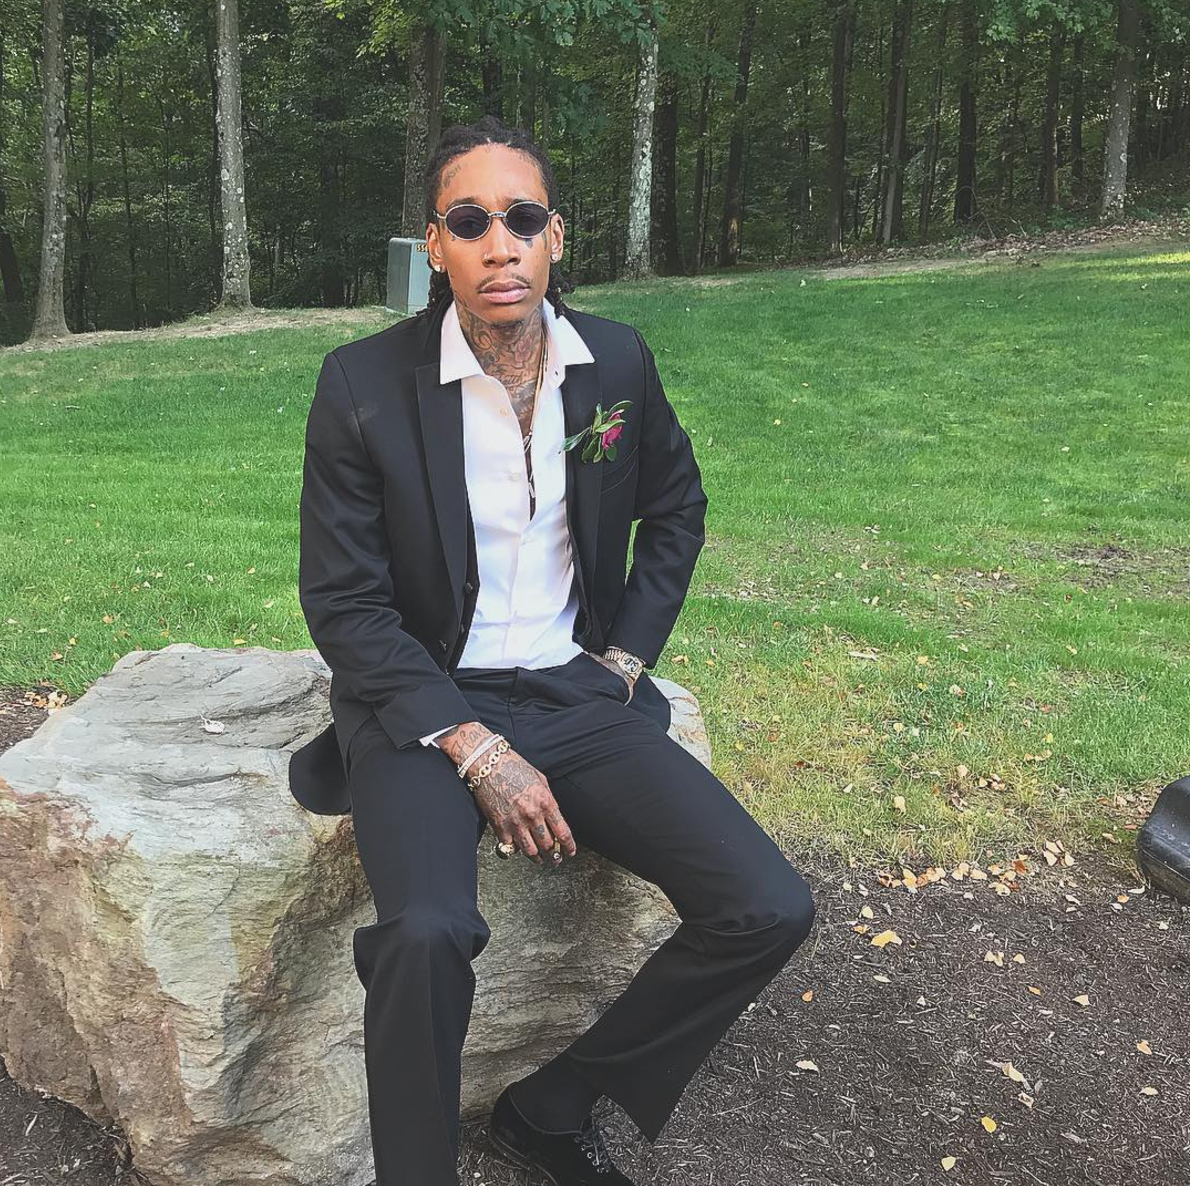 SPOTTED: Wiz Khalifa In A Black Suit